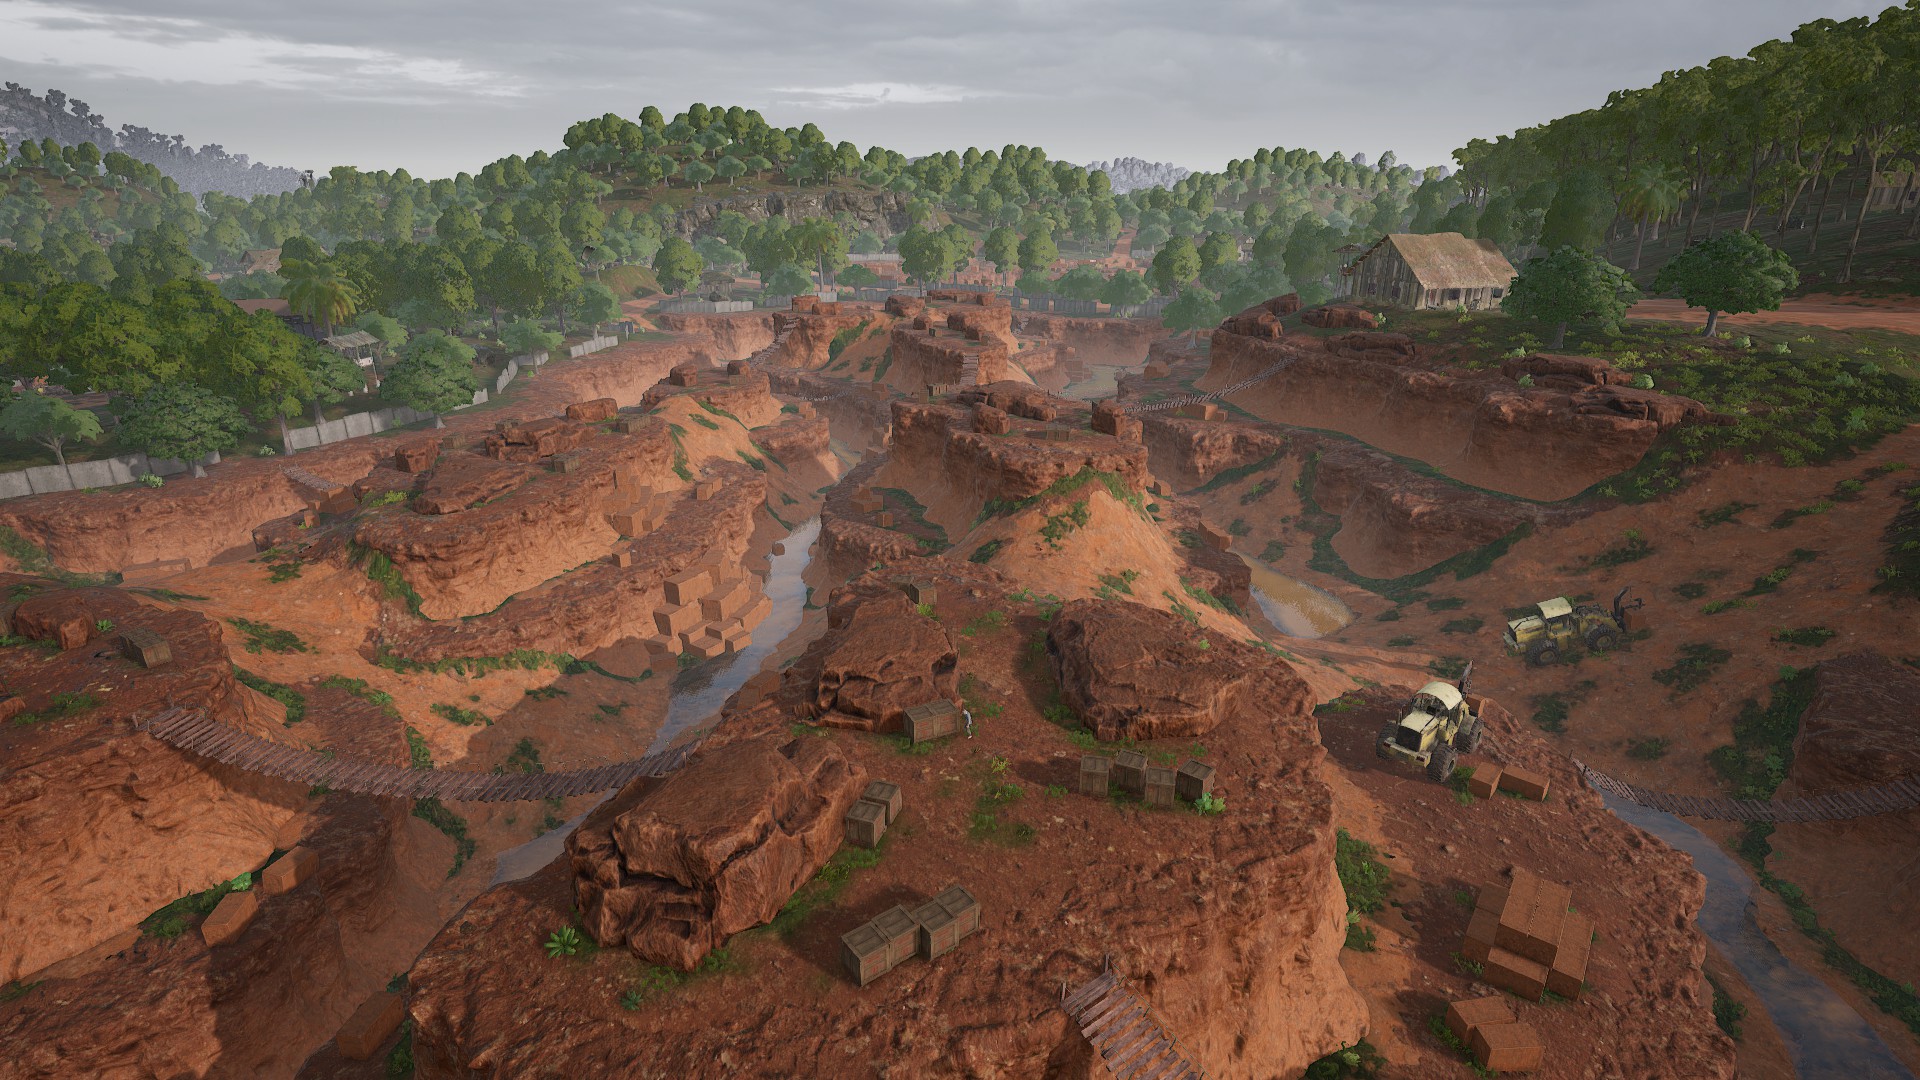 PUBG Sanhok drops: The dusty Quarry located in the middle of Sanhok, with two trucks in a gulch on the right side, and the jungle in the distance.